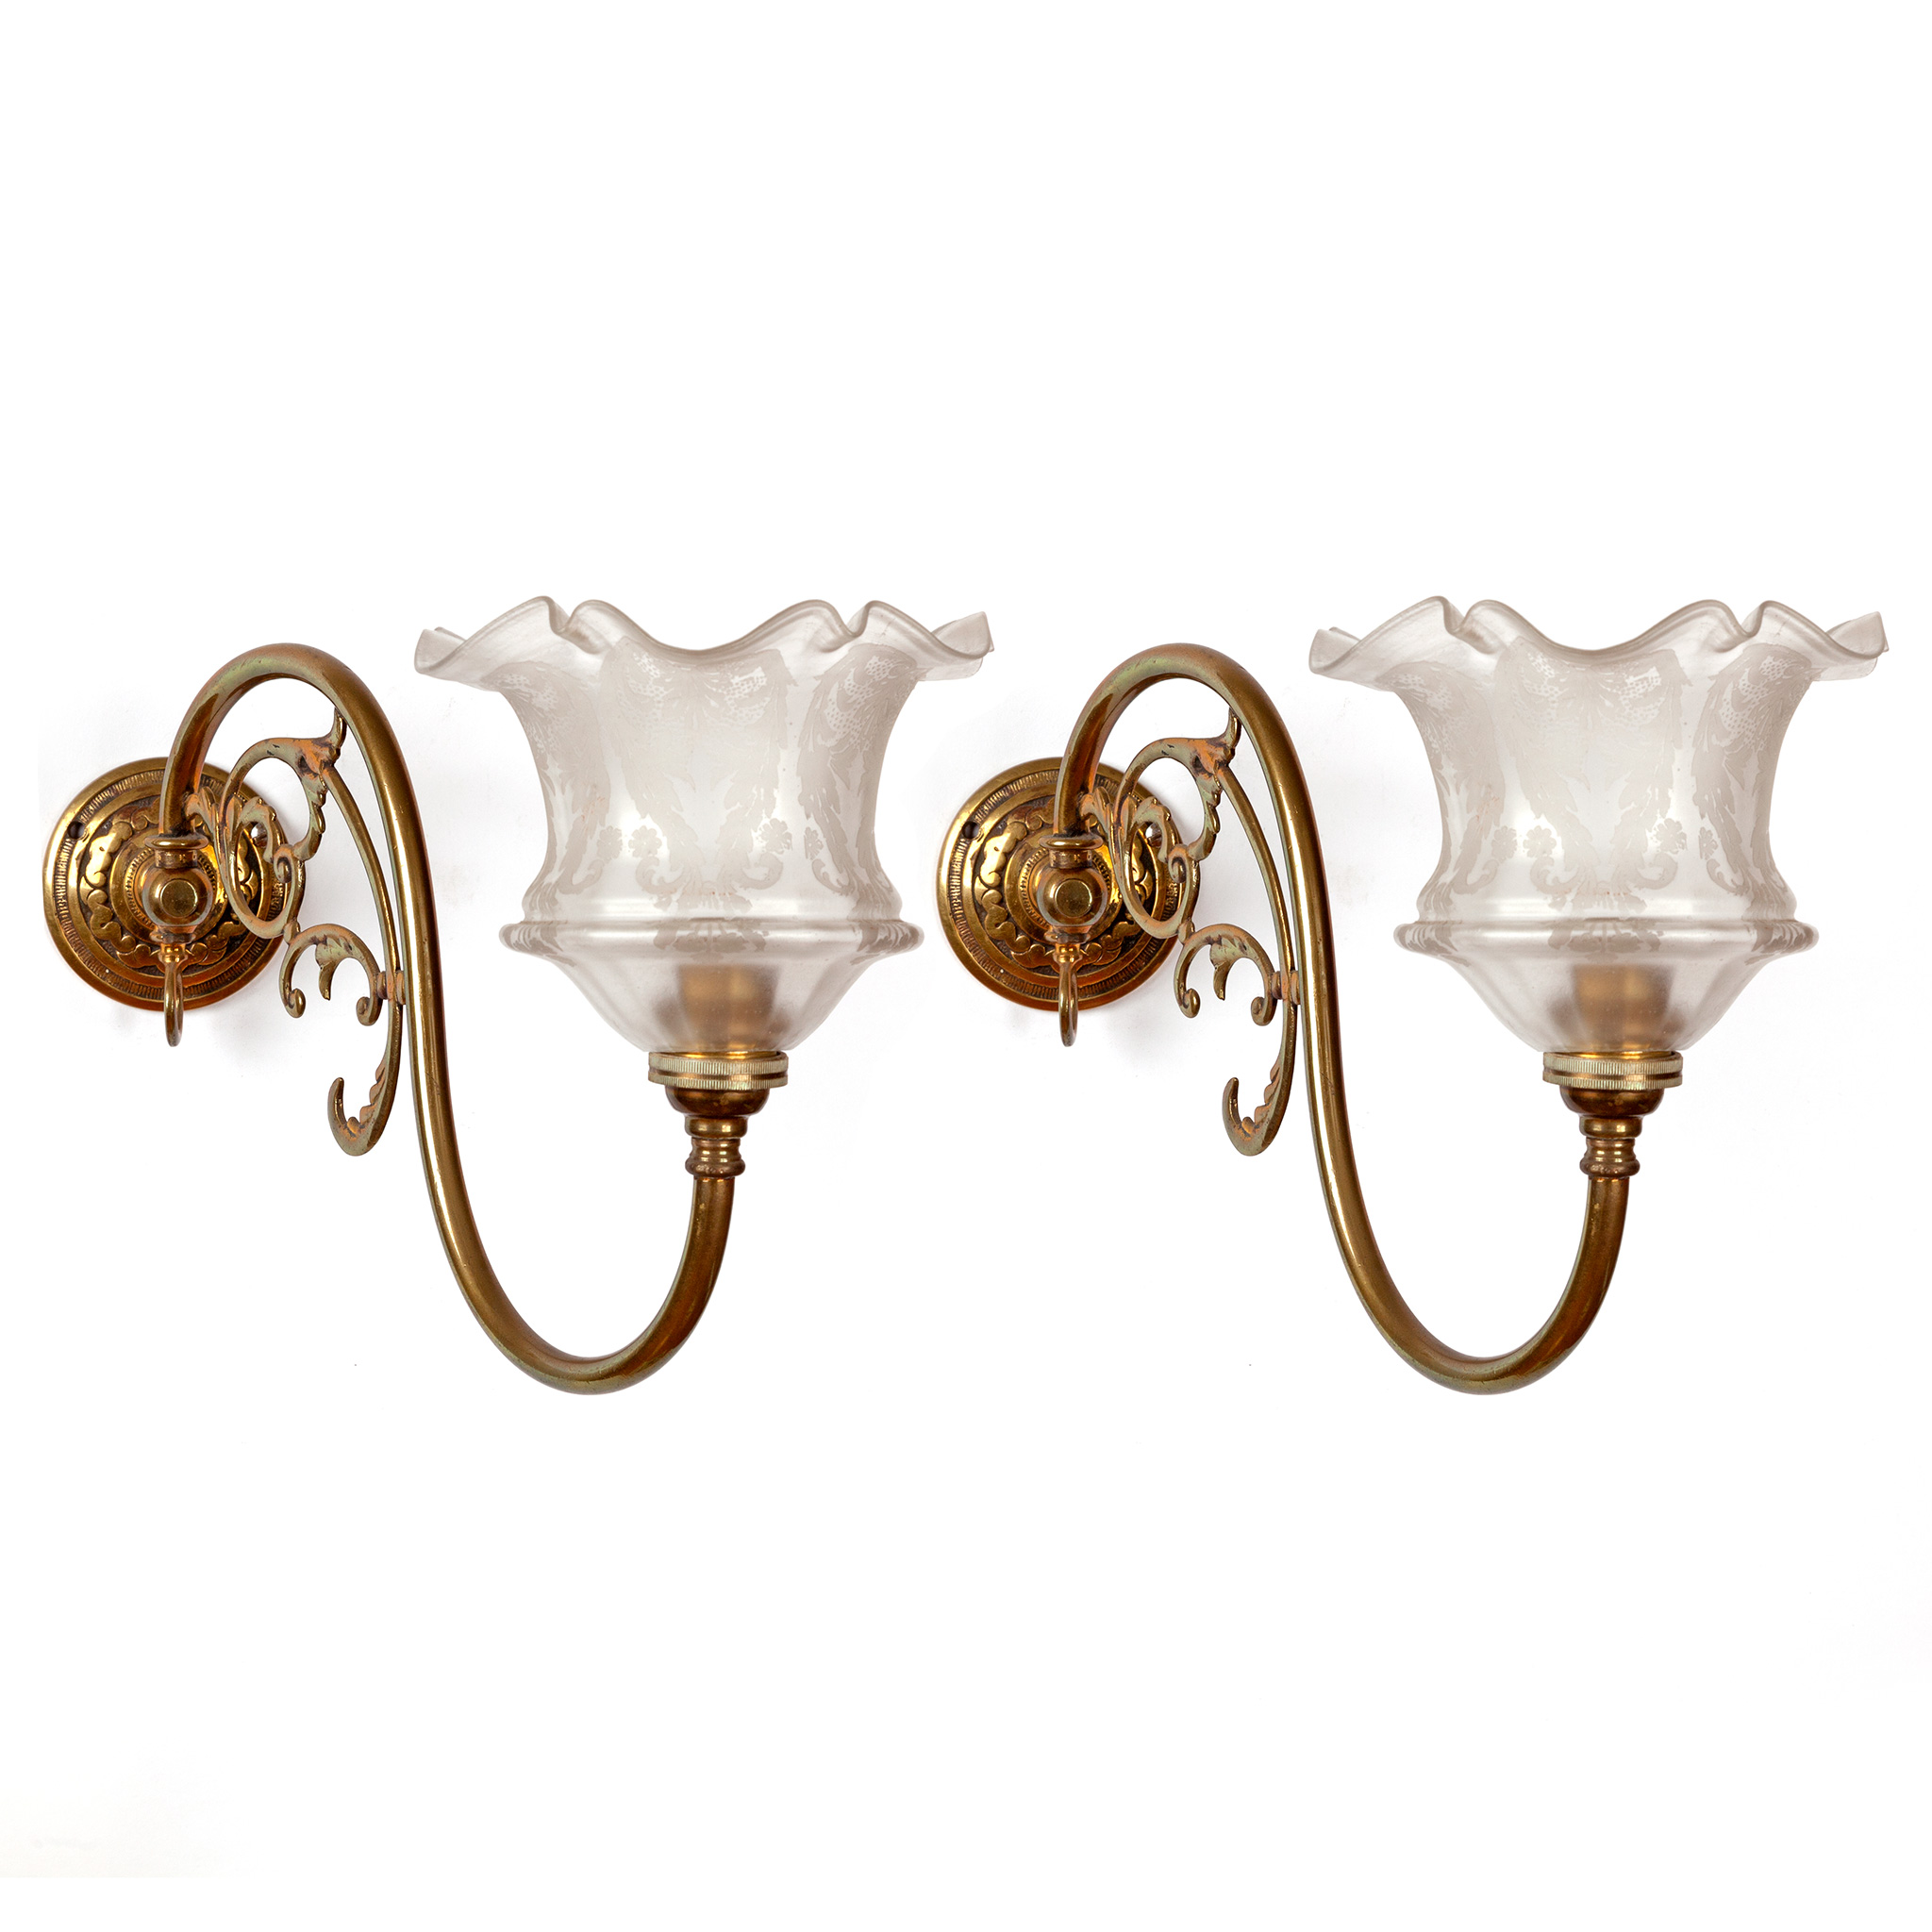 Pair of Decorative Victorian Swivelling Brass Wall Lights with finely Etched Frosted Fluted Shades (c.1890)